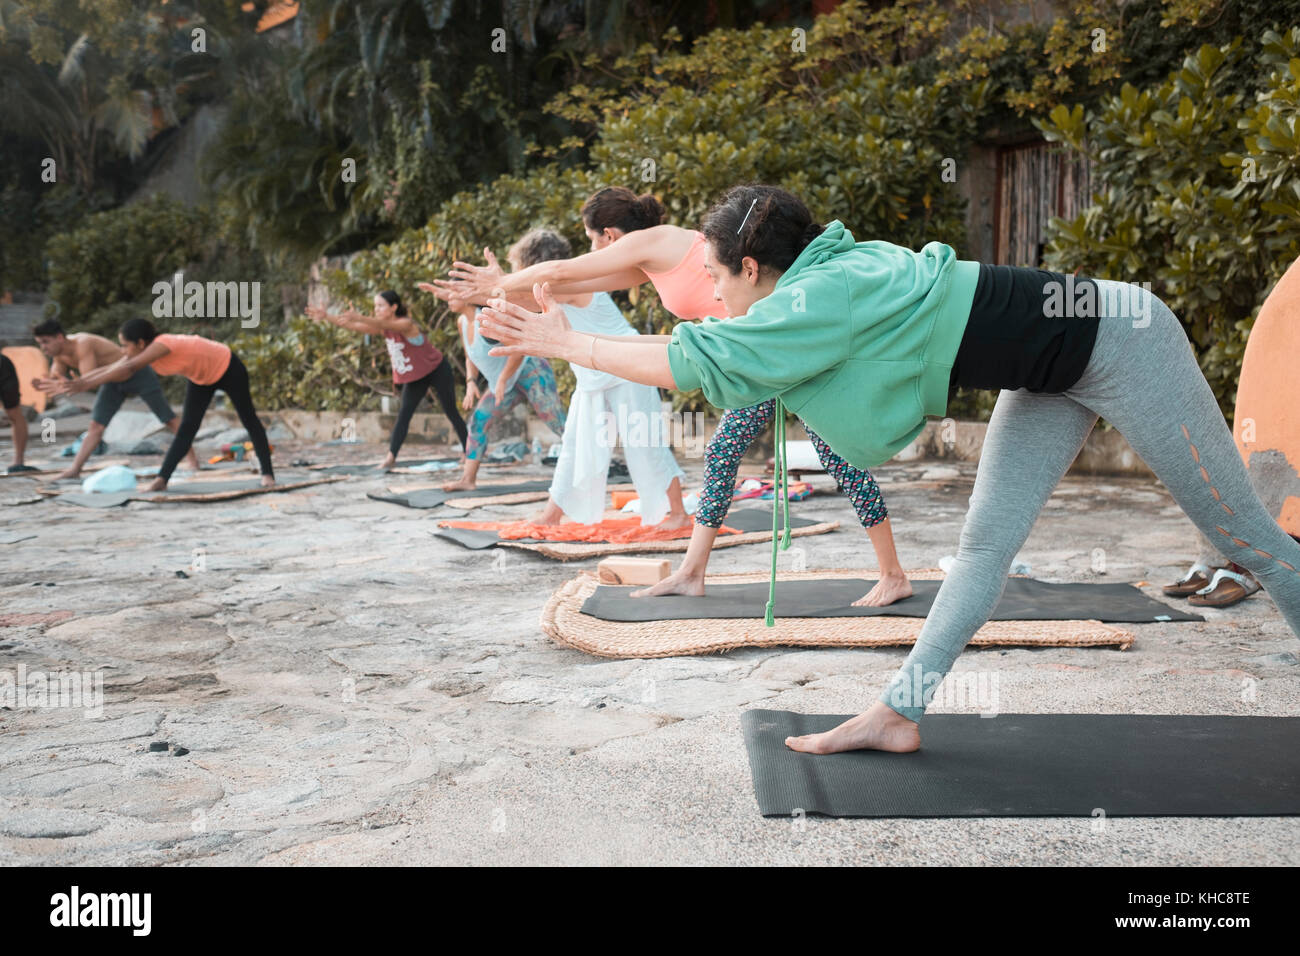 Yoga group - multiple people exercising outdoors. Stock Photo